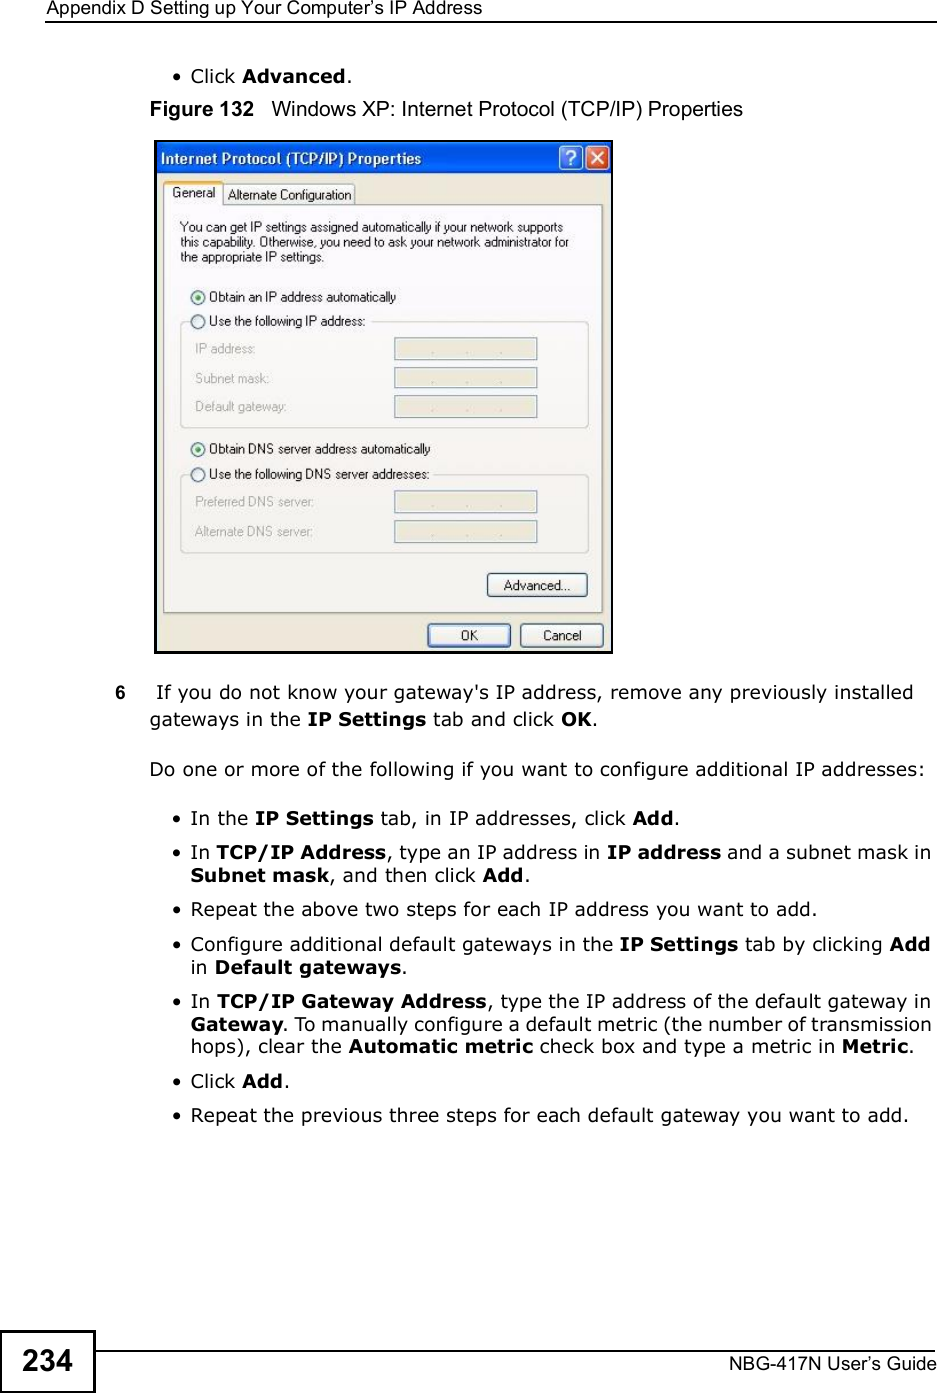 Appendix DSetting up Your Computer s IP AddressNBG-417N User s Guide234 Click Advanced.Figure 132   Windows XP: Internet Protocol (TCP/IP) Properties6 If you do not know your gateway&apos;s IP address, remove any previously installed gateways in the IP Settings tab and click OK.Do one or more of the following if you want to configure additional IP addresses: In the IP Settings tab, in IP addresses, click Add. In TCP/IP Address, type an IP address in IP address and a subnet mask in Subnet mask, and then click Add. Repeat the above two steps for each IP address you want to add. Configure additional default gateways in the IP Settings tab by clicking Add in Default gateways. In TCP/IP Gateway Address, type the IP address of the default gateway in Gateway. To manually configure a default metric (the number of transmission hops), clear the Automatic metric check box and type a metric in Metric. Click Add.  Repeat the previous three steps for each default gateway you want to add.